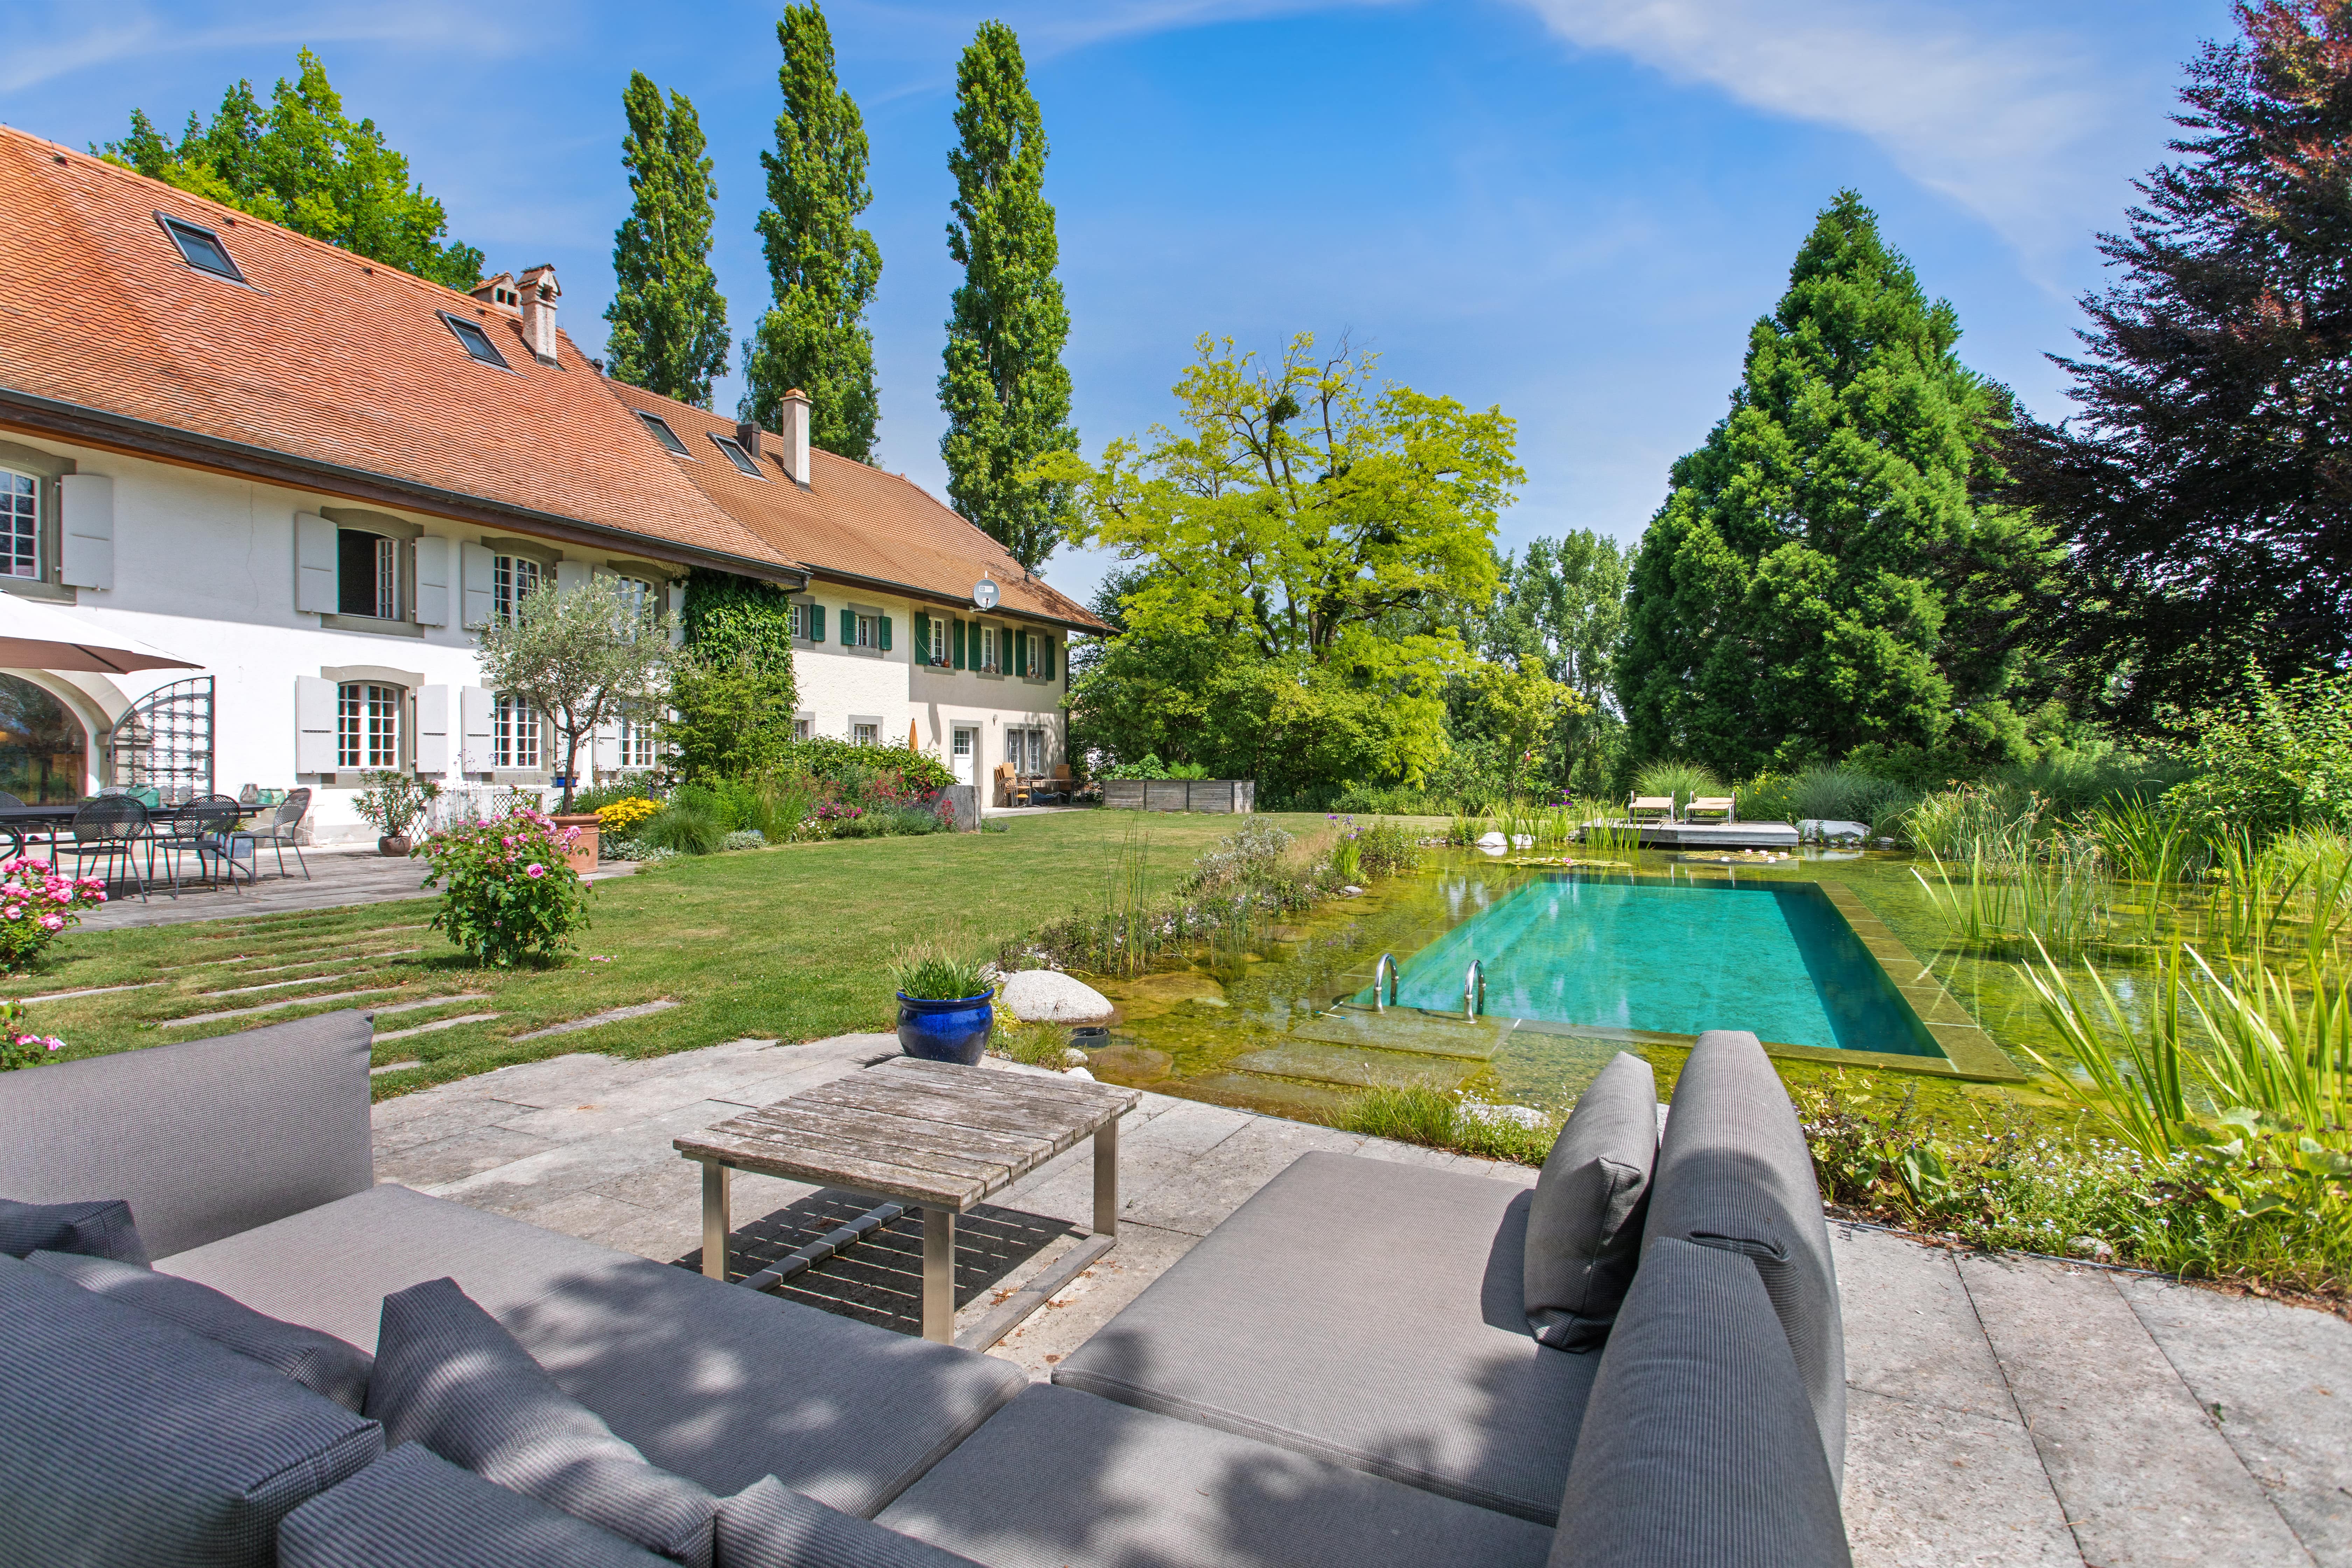 Splendid equestrian farm with large garden and swimming pool